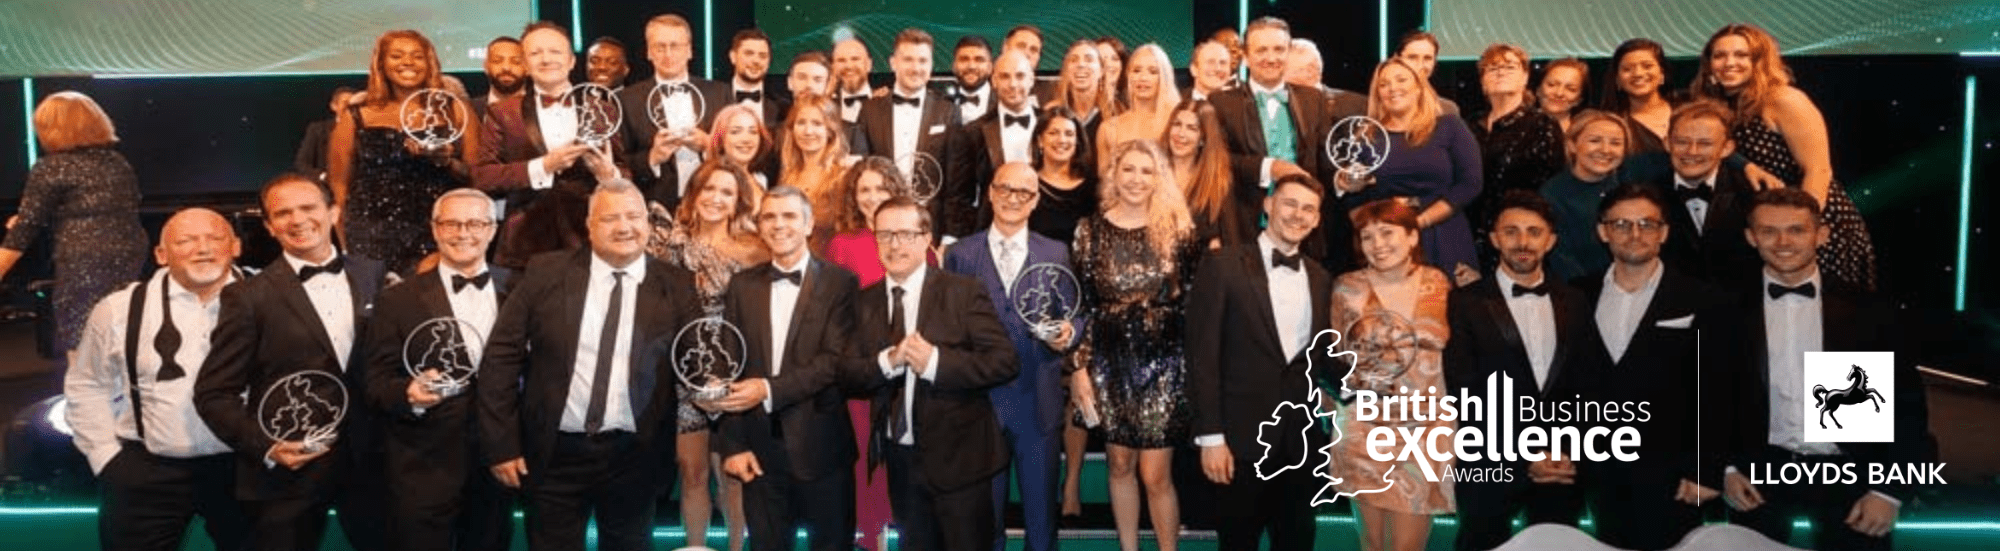 The 2022 Lloyds Bank British Business Excellence Awards are now open